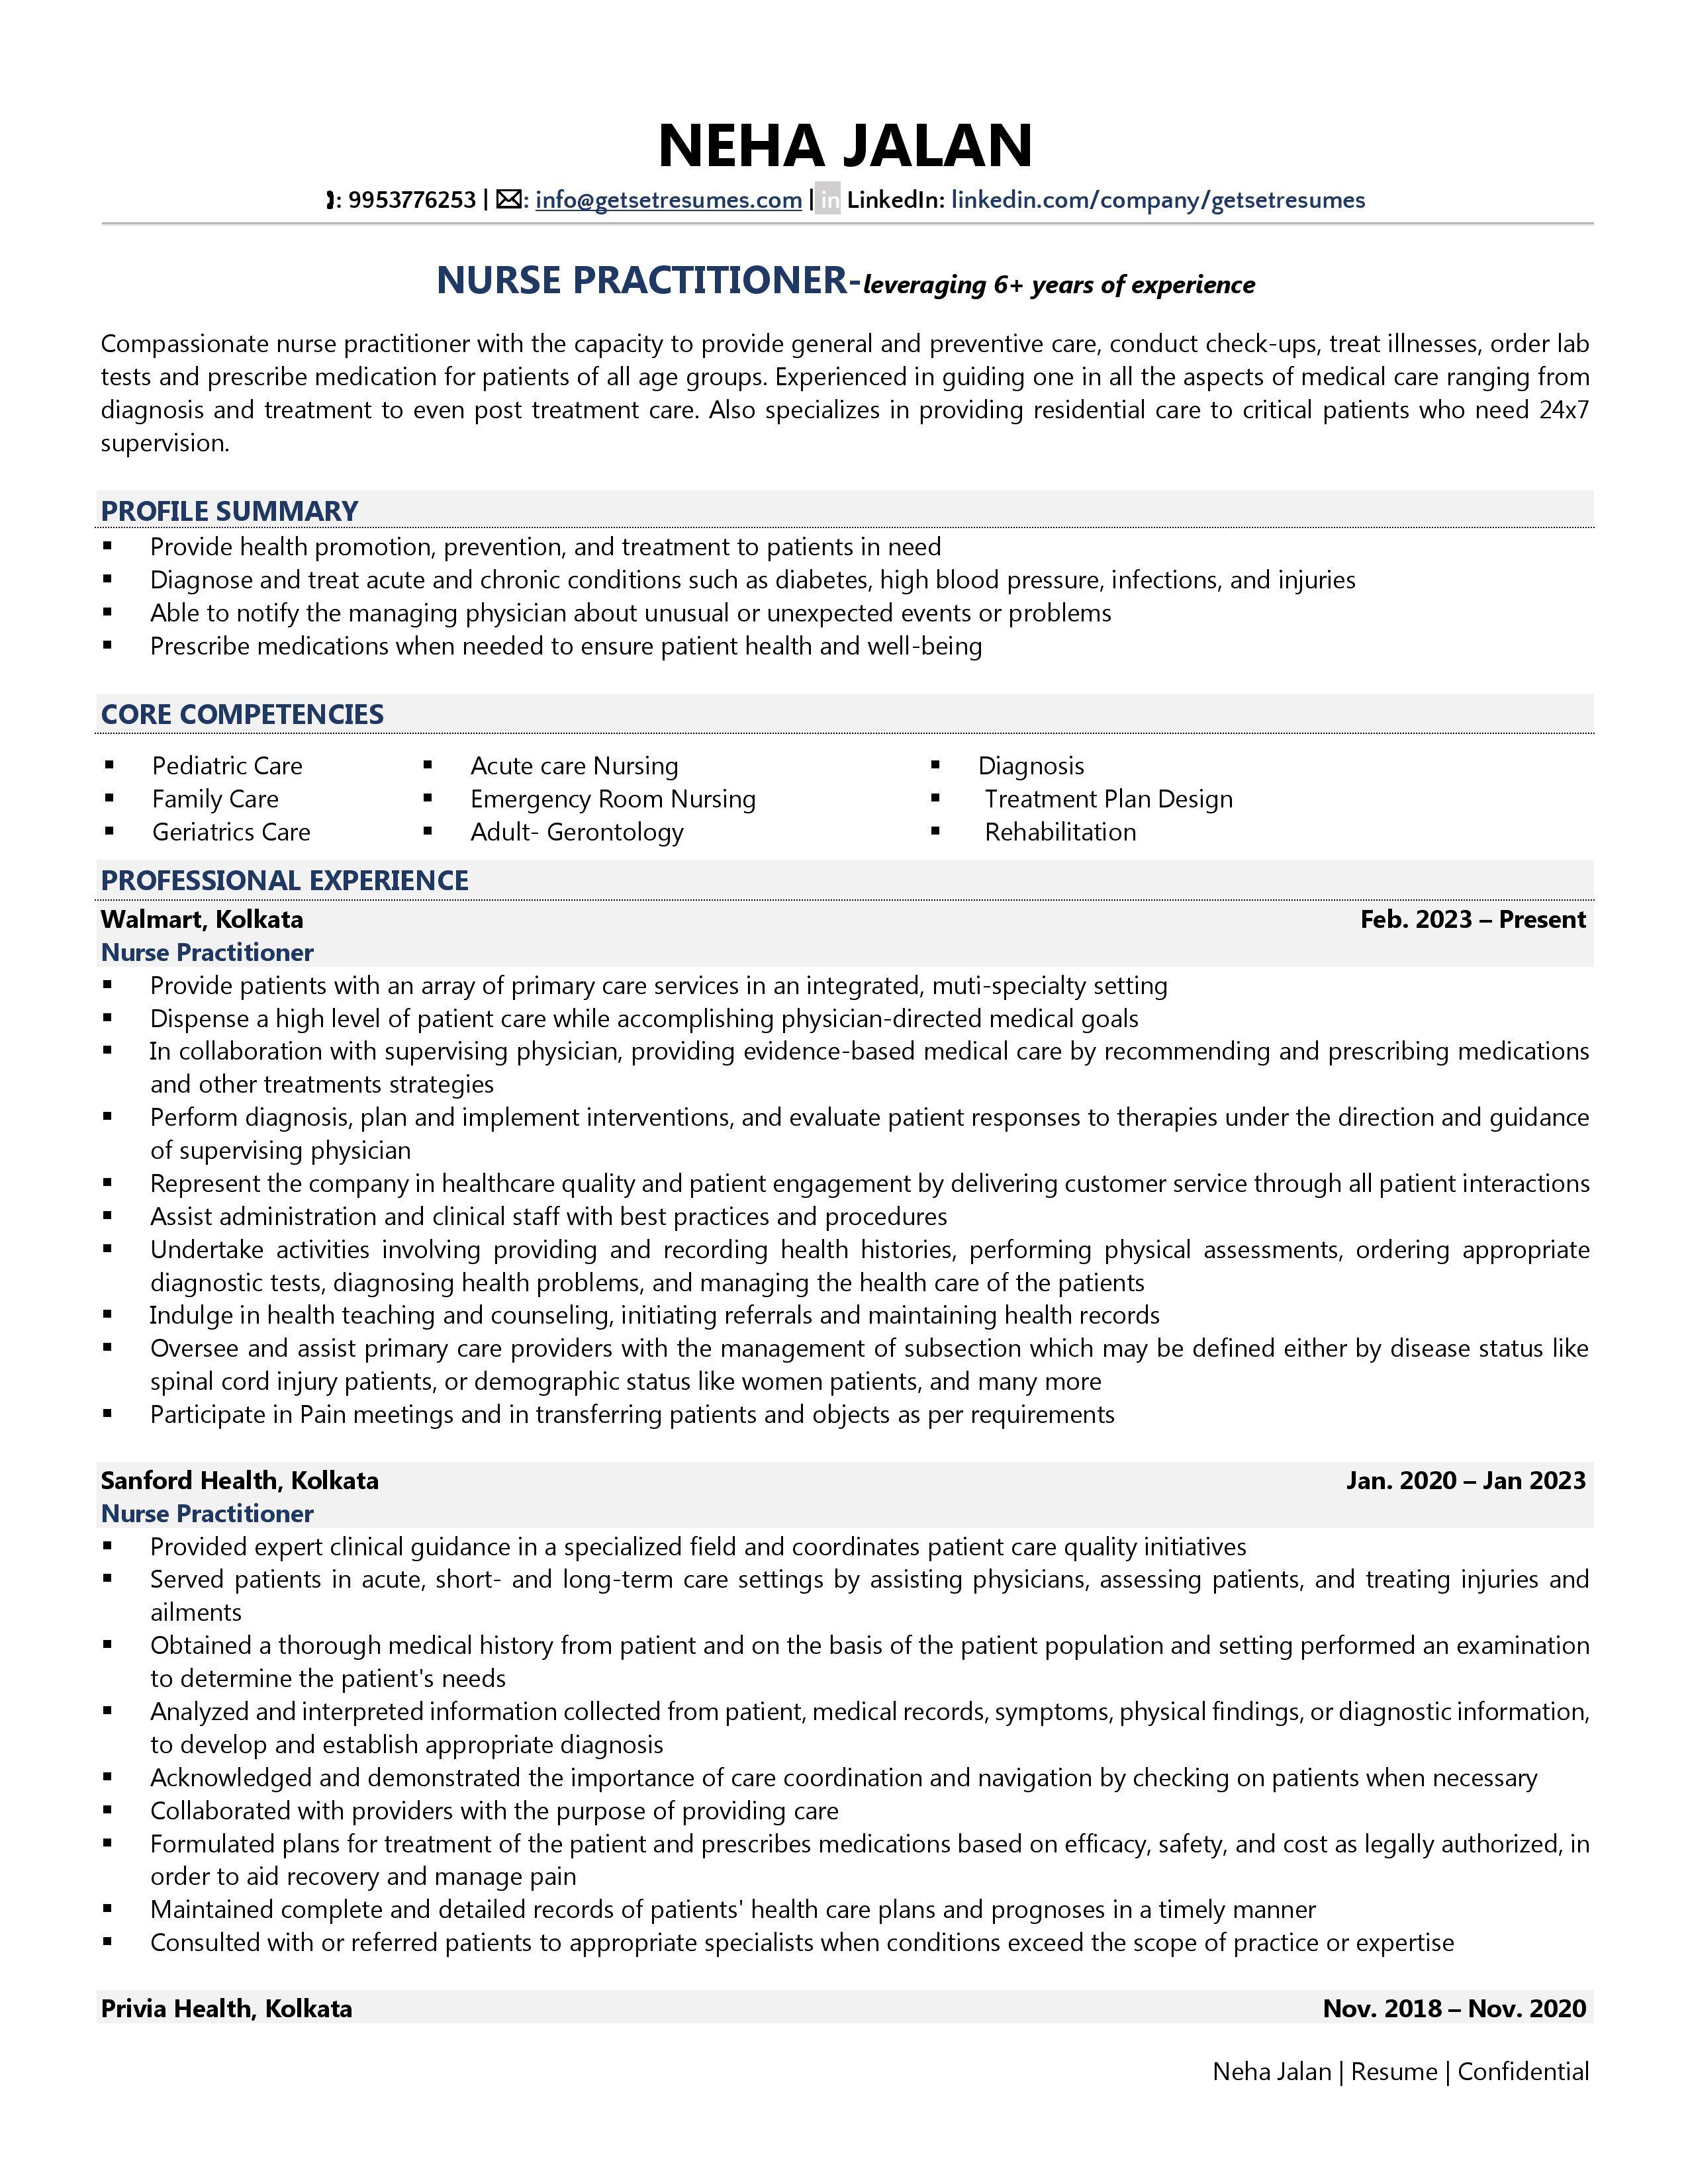 free download resume template for nurse practitioner